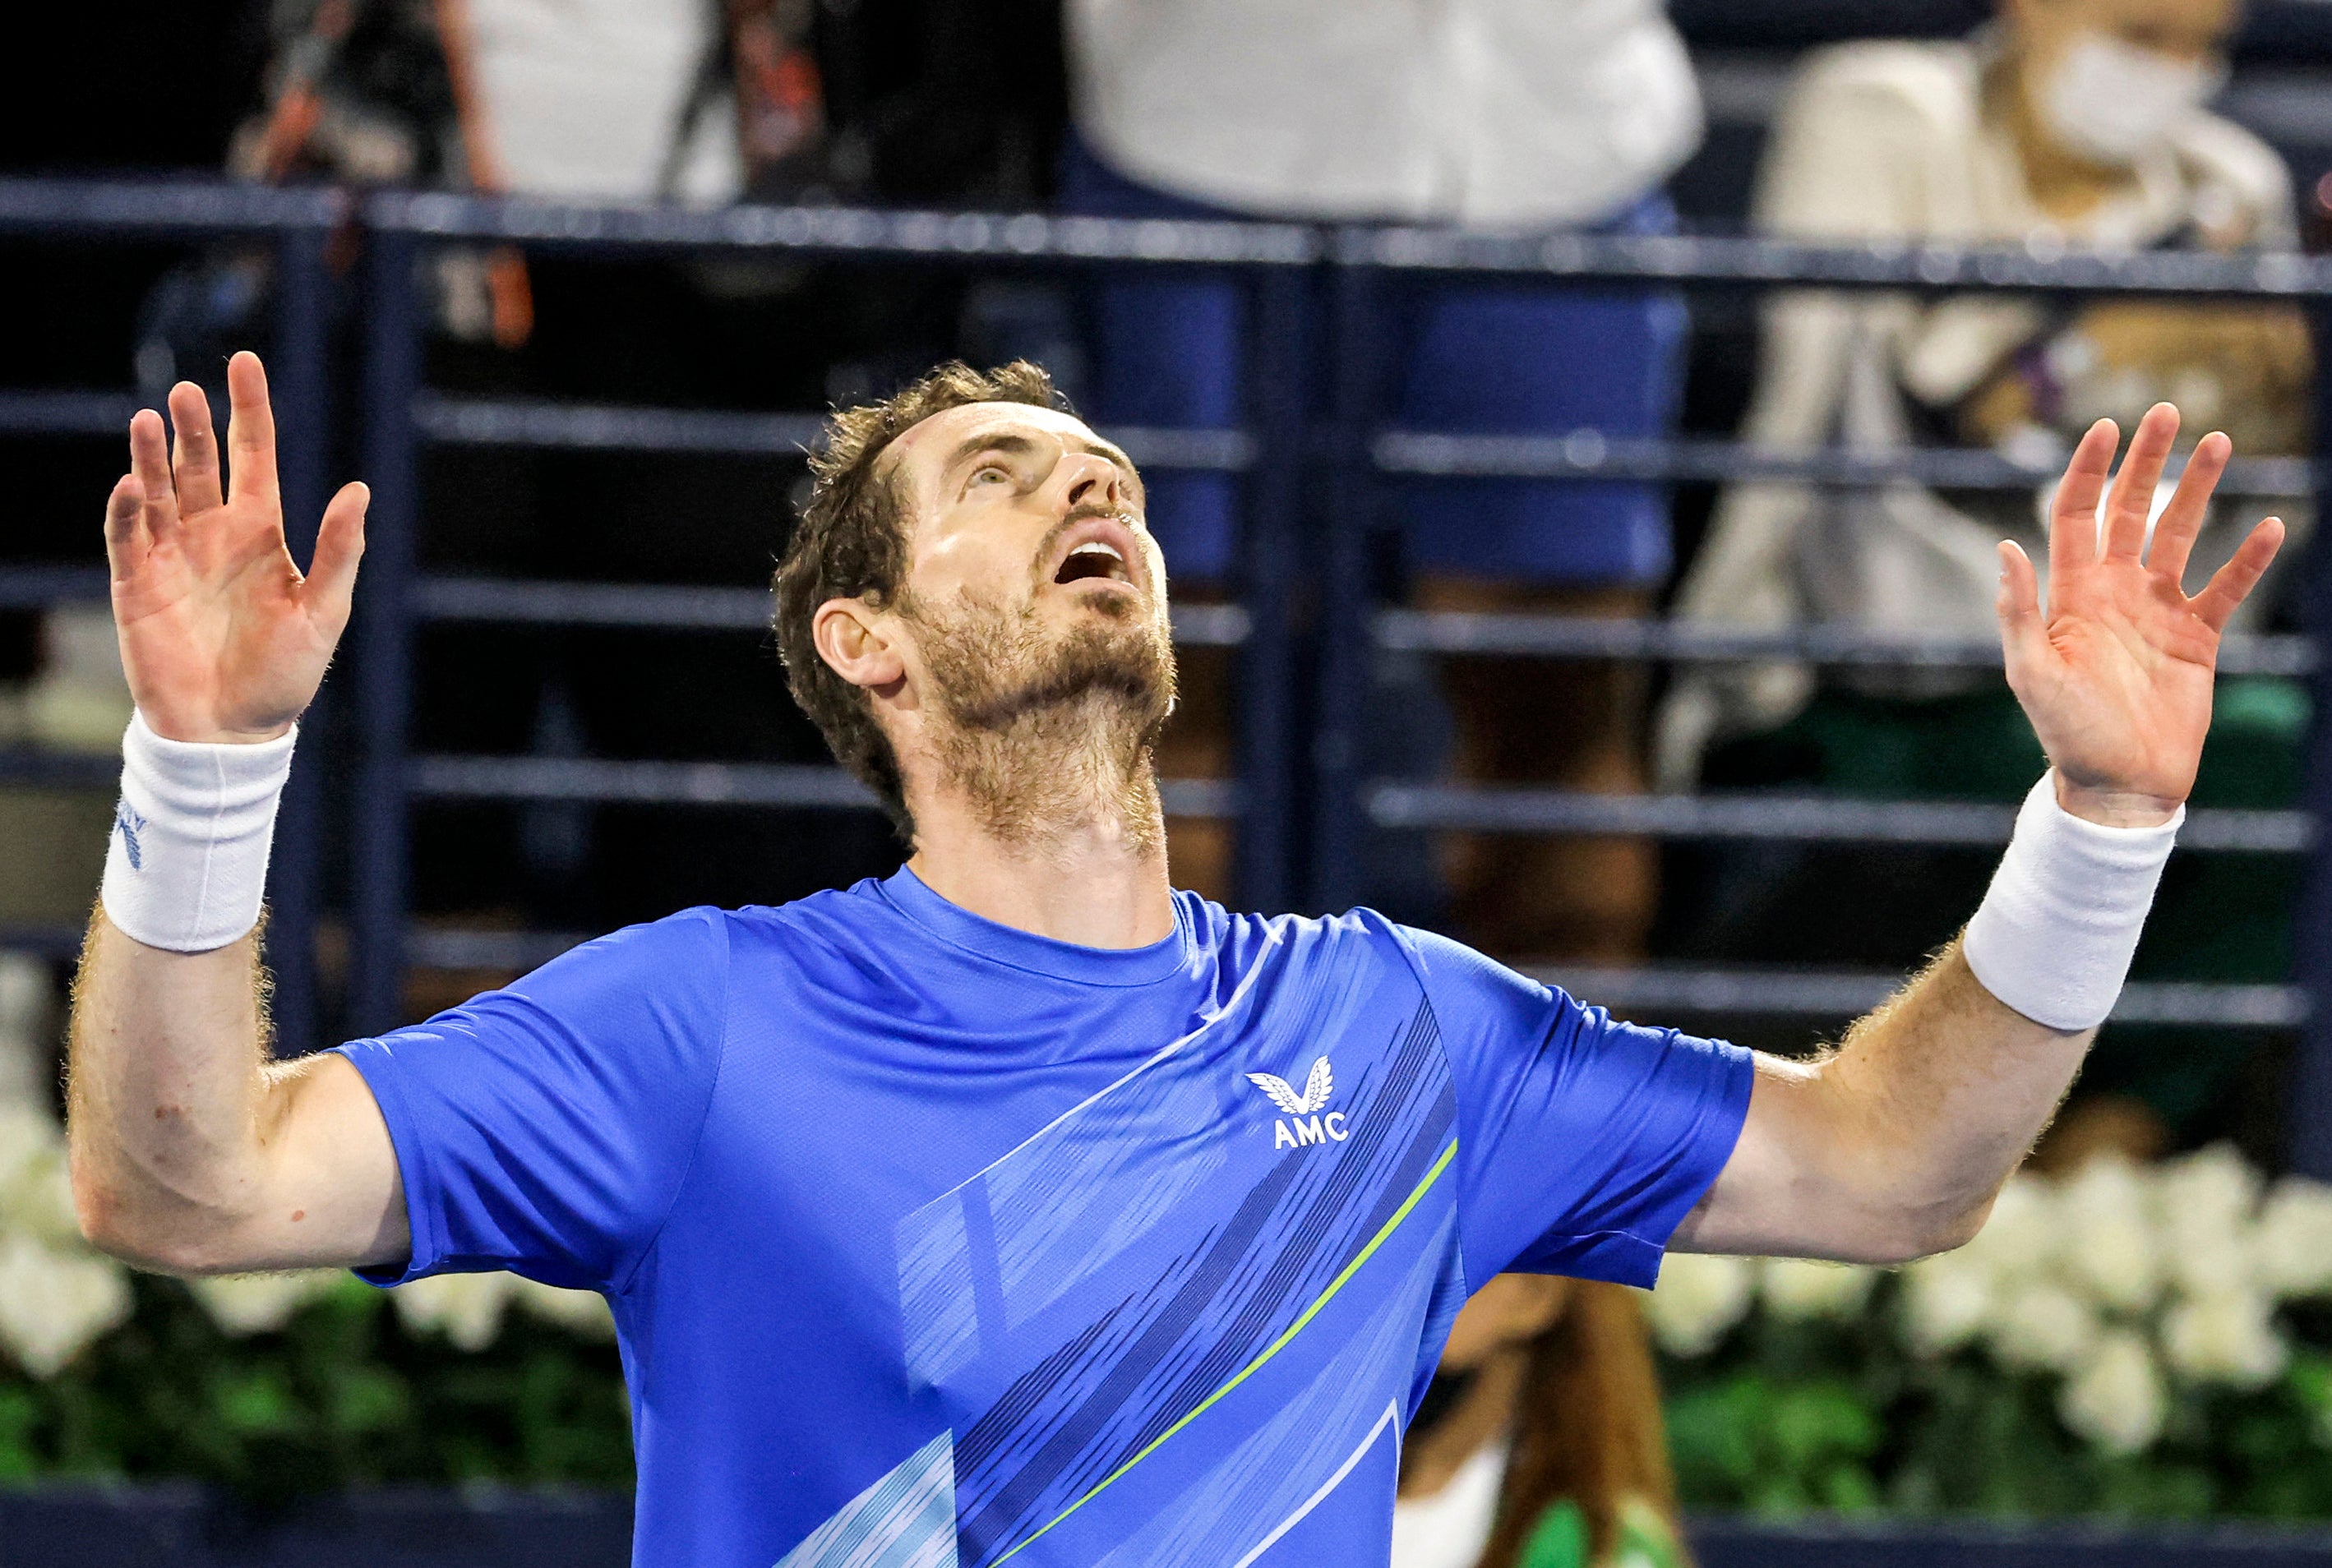 Andy Murray prevailed in two hours and 51 minutes in Dubai